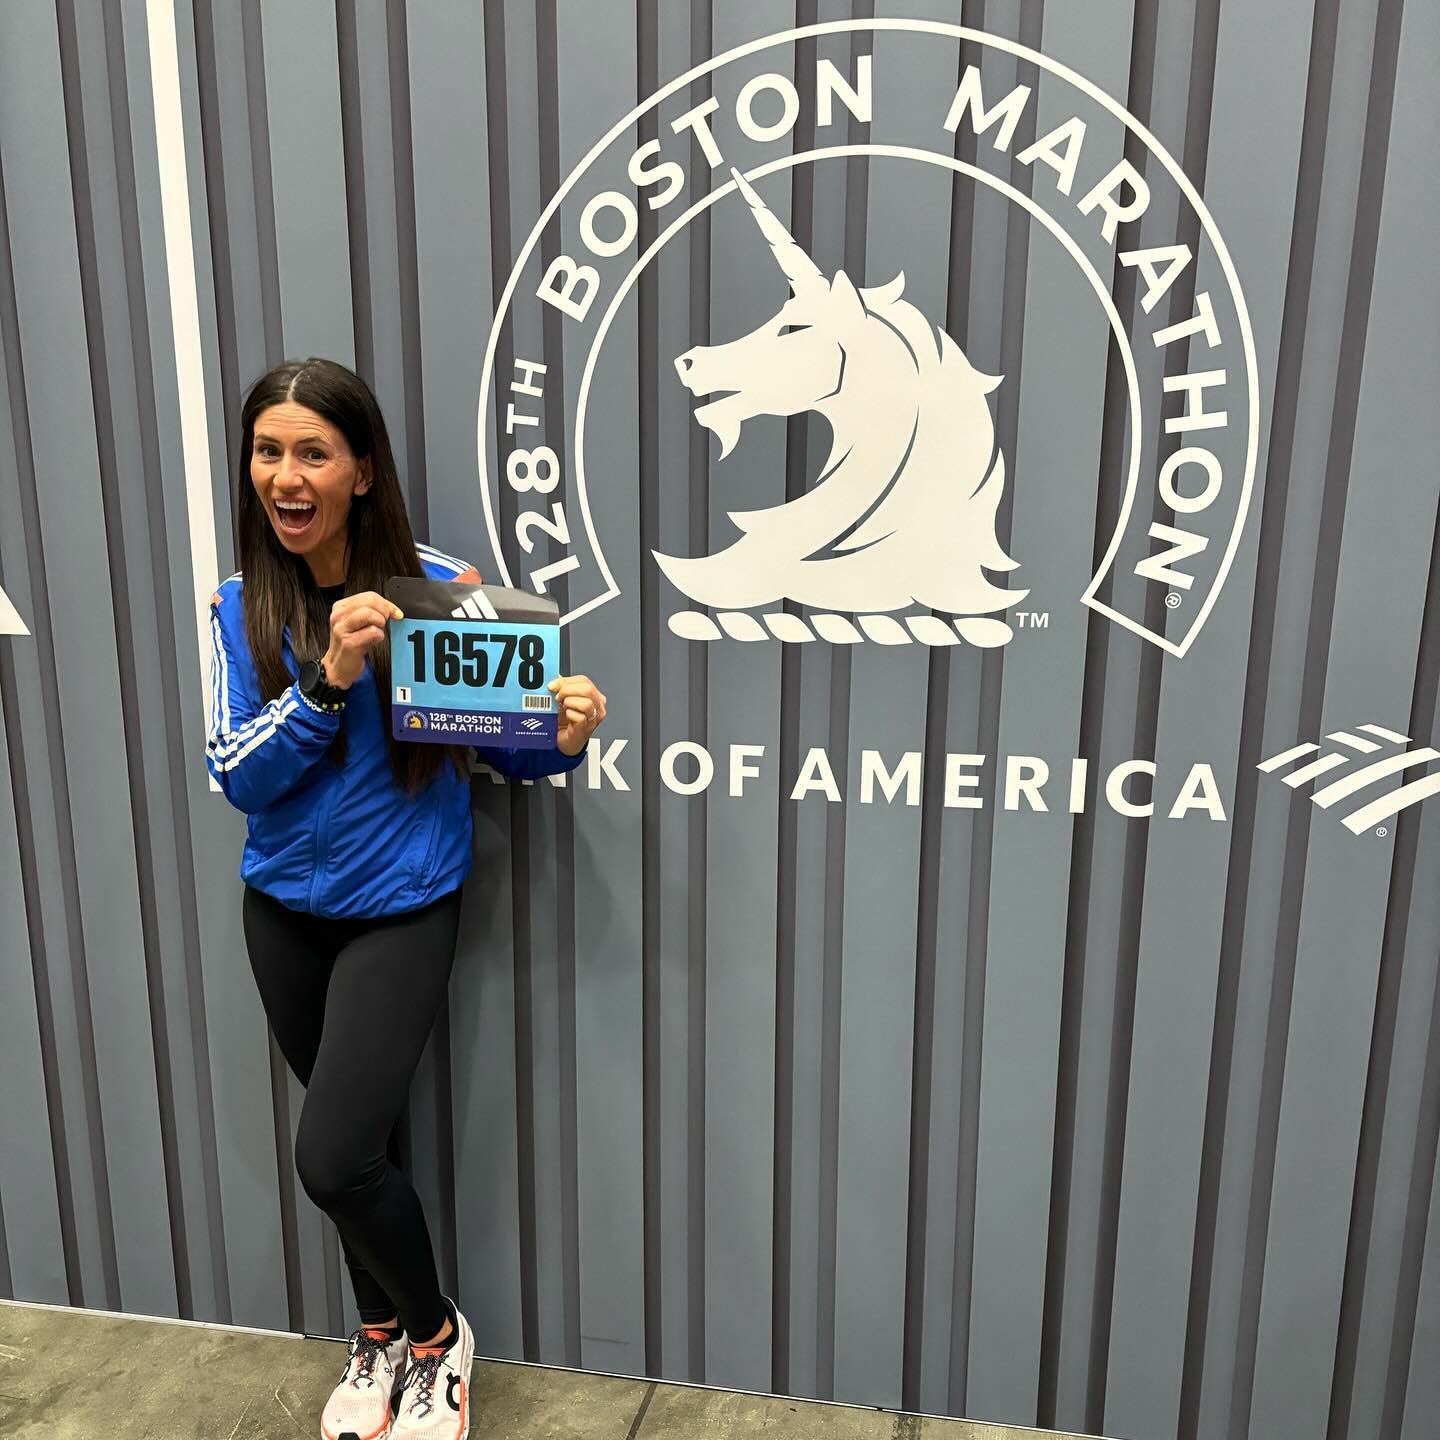 Boston Marathon number 4 going down the hatch tomorrow. What a gift 💙💛💙💛
.
.
I ran my first Boston 10 years ago- in 2014 and it never gets old or less special. 
.
.
.
My plan is to run smart and steady, to have fun and focus on my big goal of the